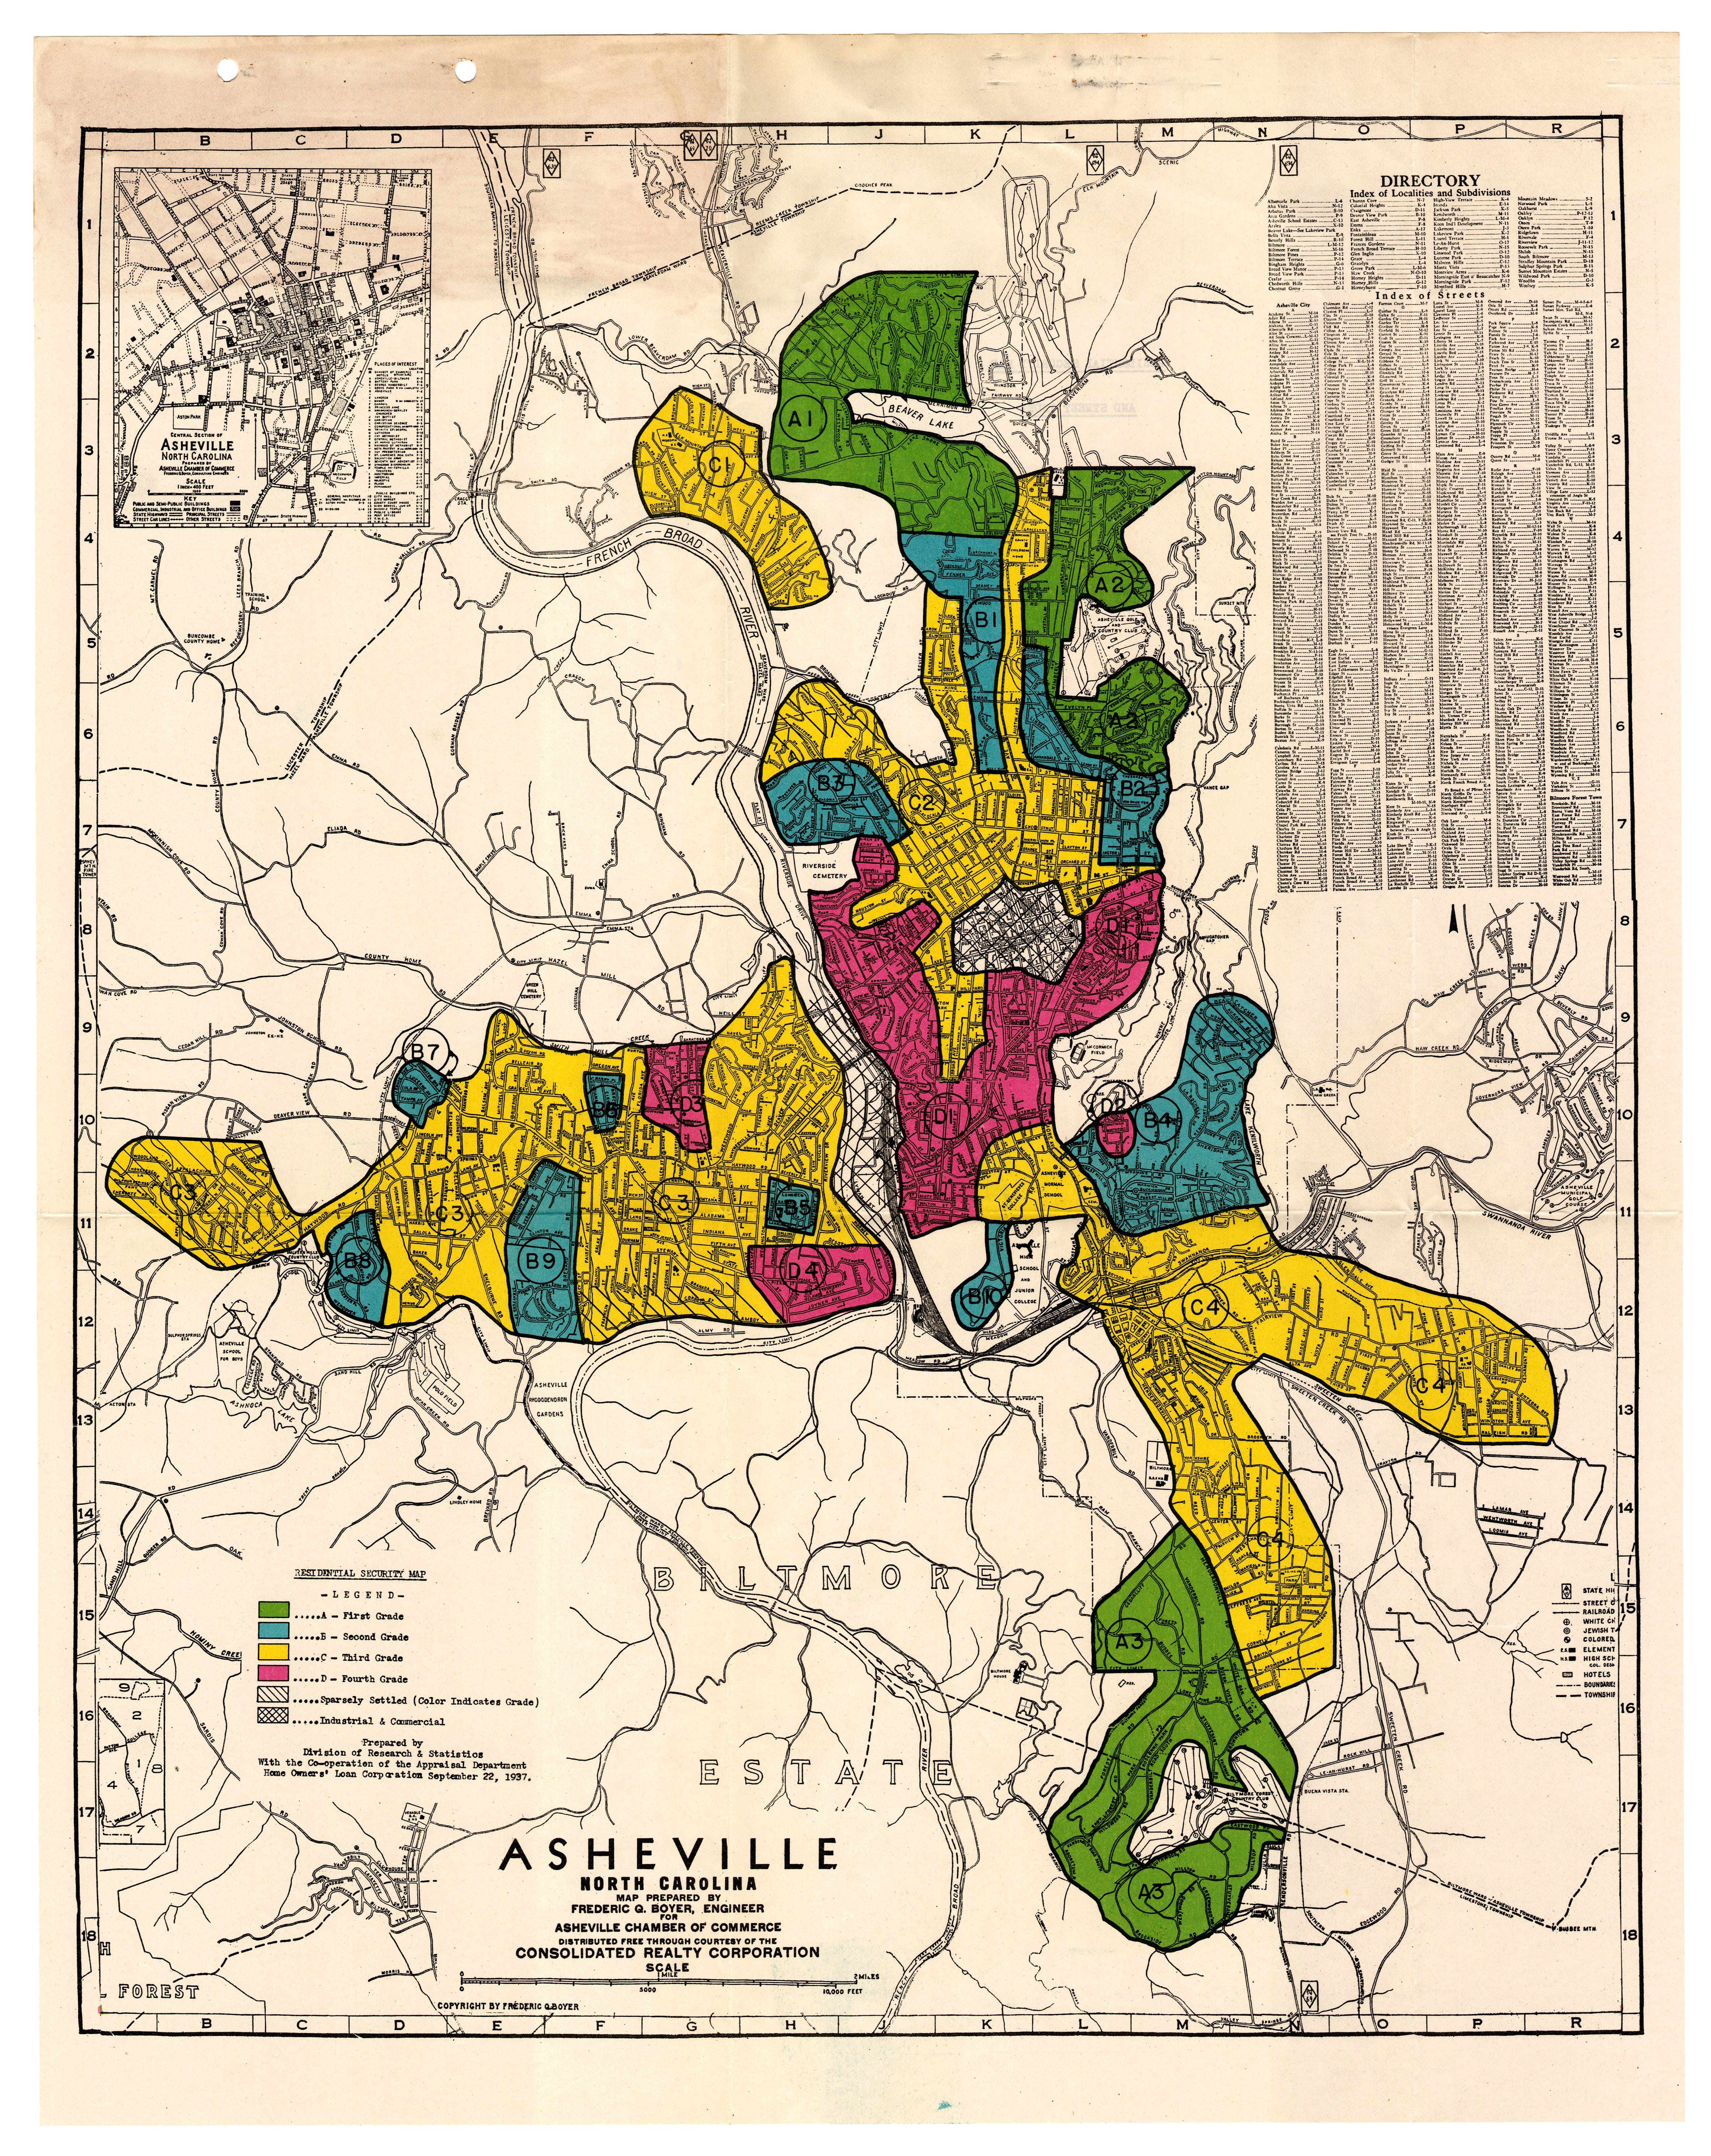 A 1937 "redlining" map by the Home Owners' Loan Corporation that designated Black Asheville neighborhoods as "hazardous."